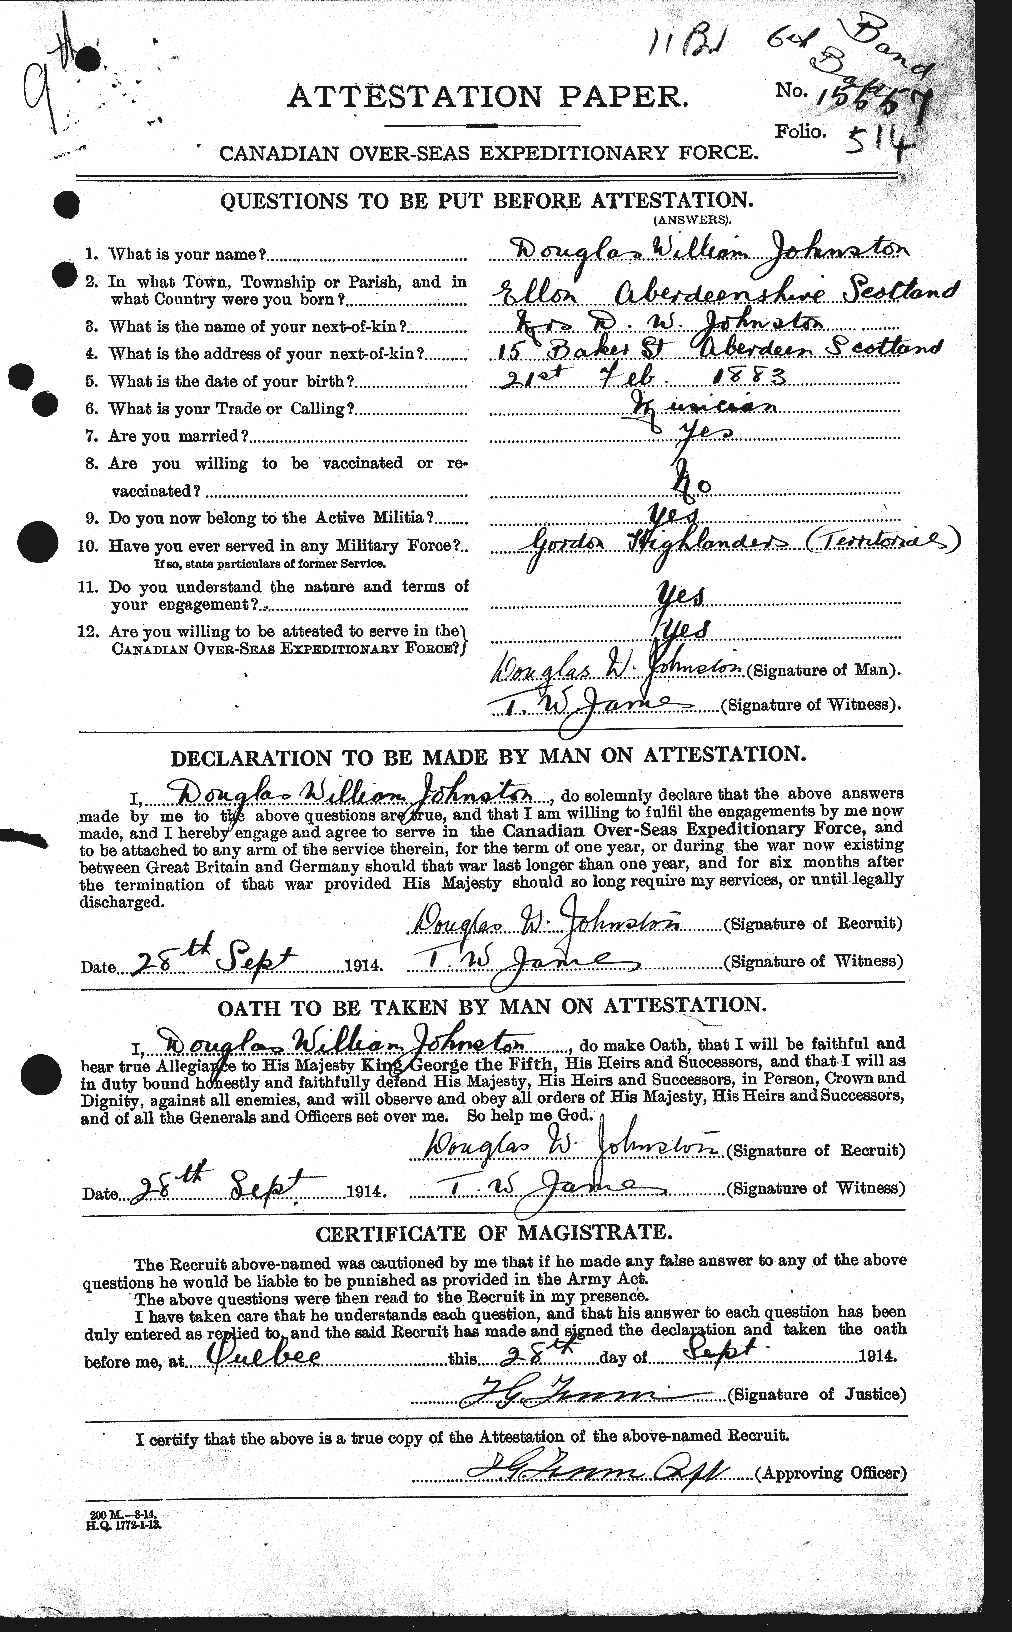 Personnel Records of the First World War - CEF 423186a